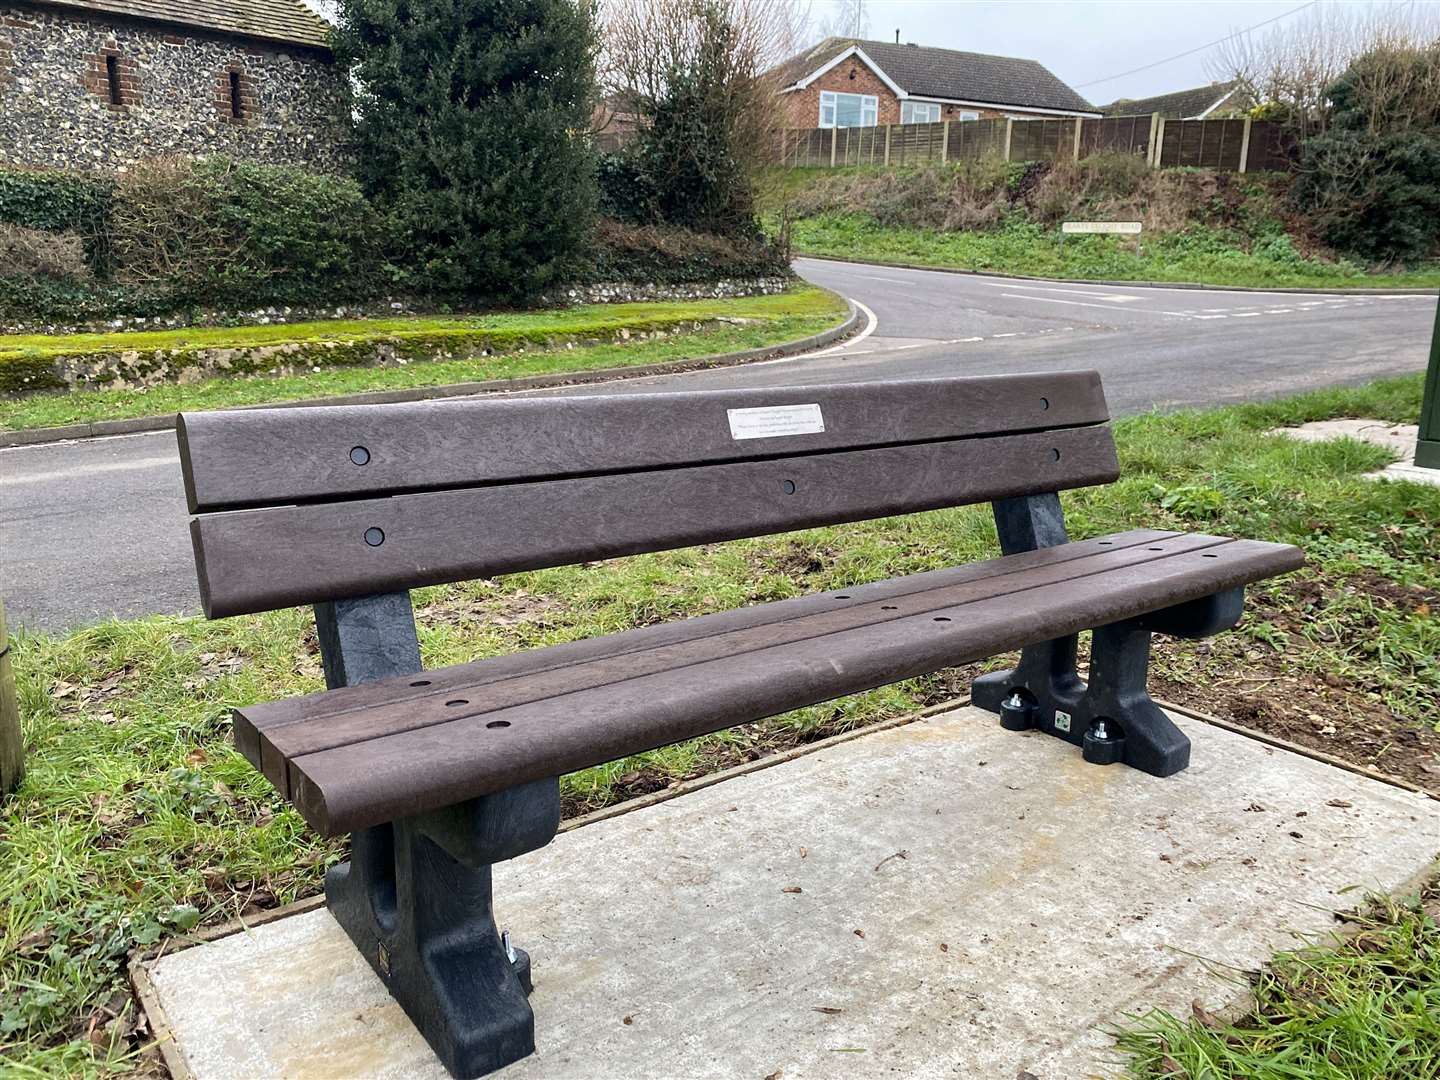 The memorial bench in Hearts Delight Road, Tunstall